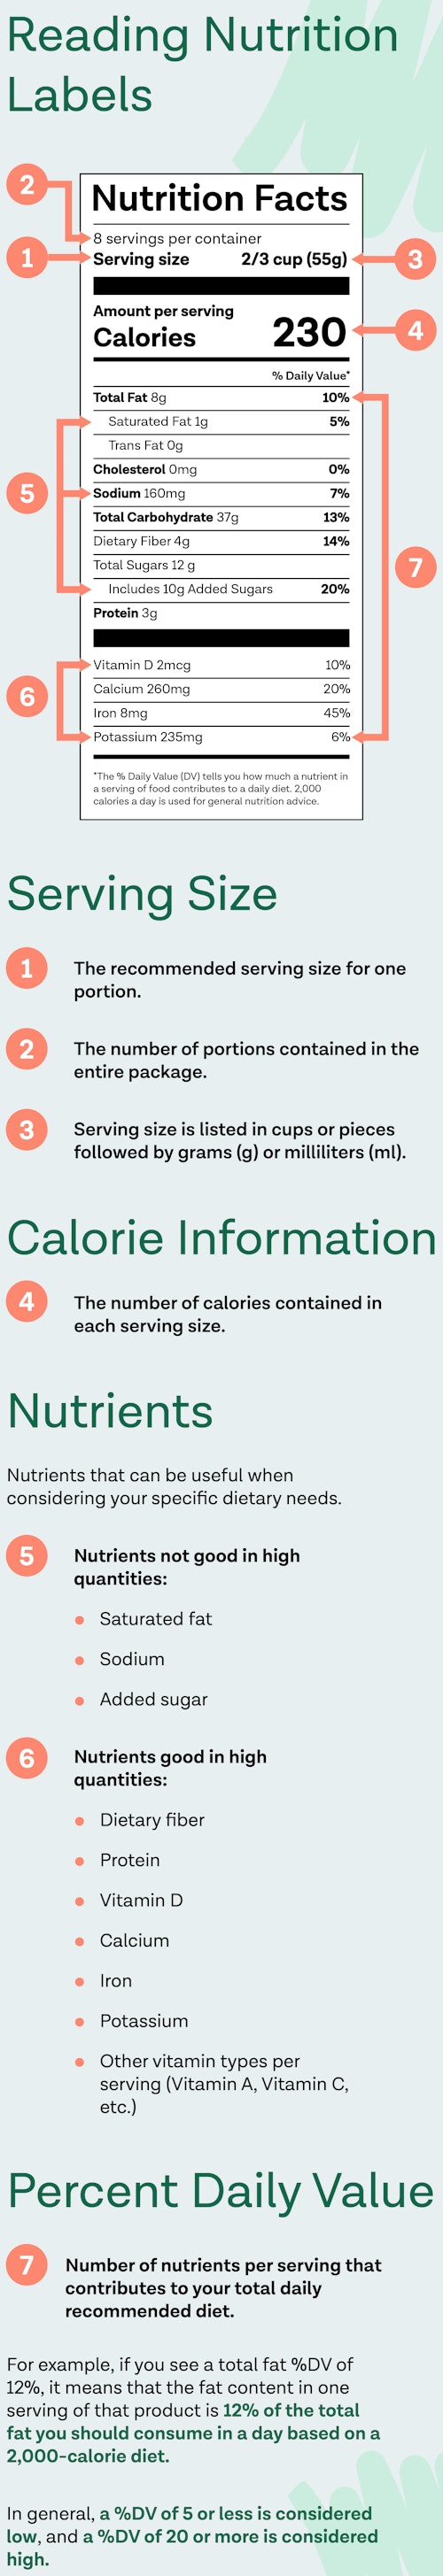 Infographic that breaks down how to read a nutrition label and apply it to your diet.